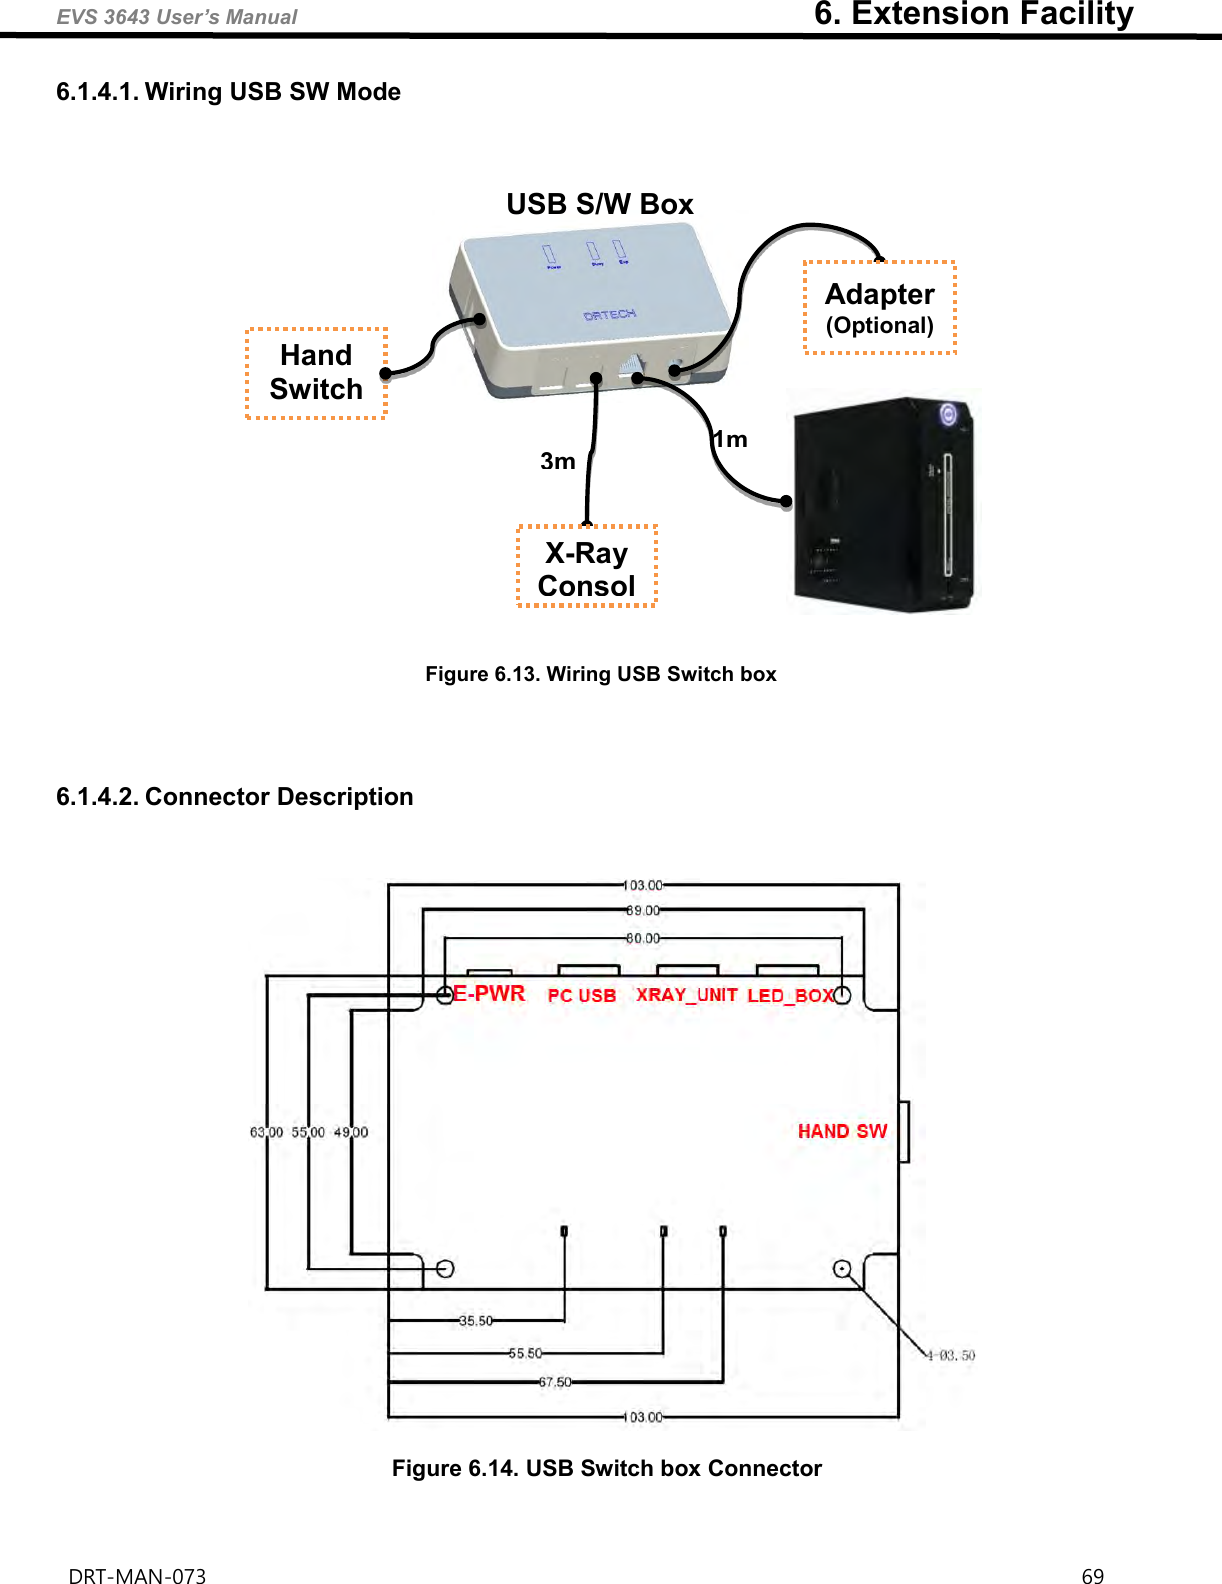 EVS 3643 User’s Manual                                                              6. Extension Facility DRT-MAN-073                                                                                                                                                                69   6.1.4.1. Wiring USB SW Mode      Figure 6.13. Wiring USB Switch box     6.1.4.2. Connector Description      Figure 6.14. USB Switch box Connector    USB S/W Box Hand   Switch X-Ray ConsoleAdapter (Optional) 1m 3m 